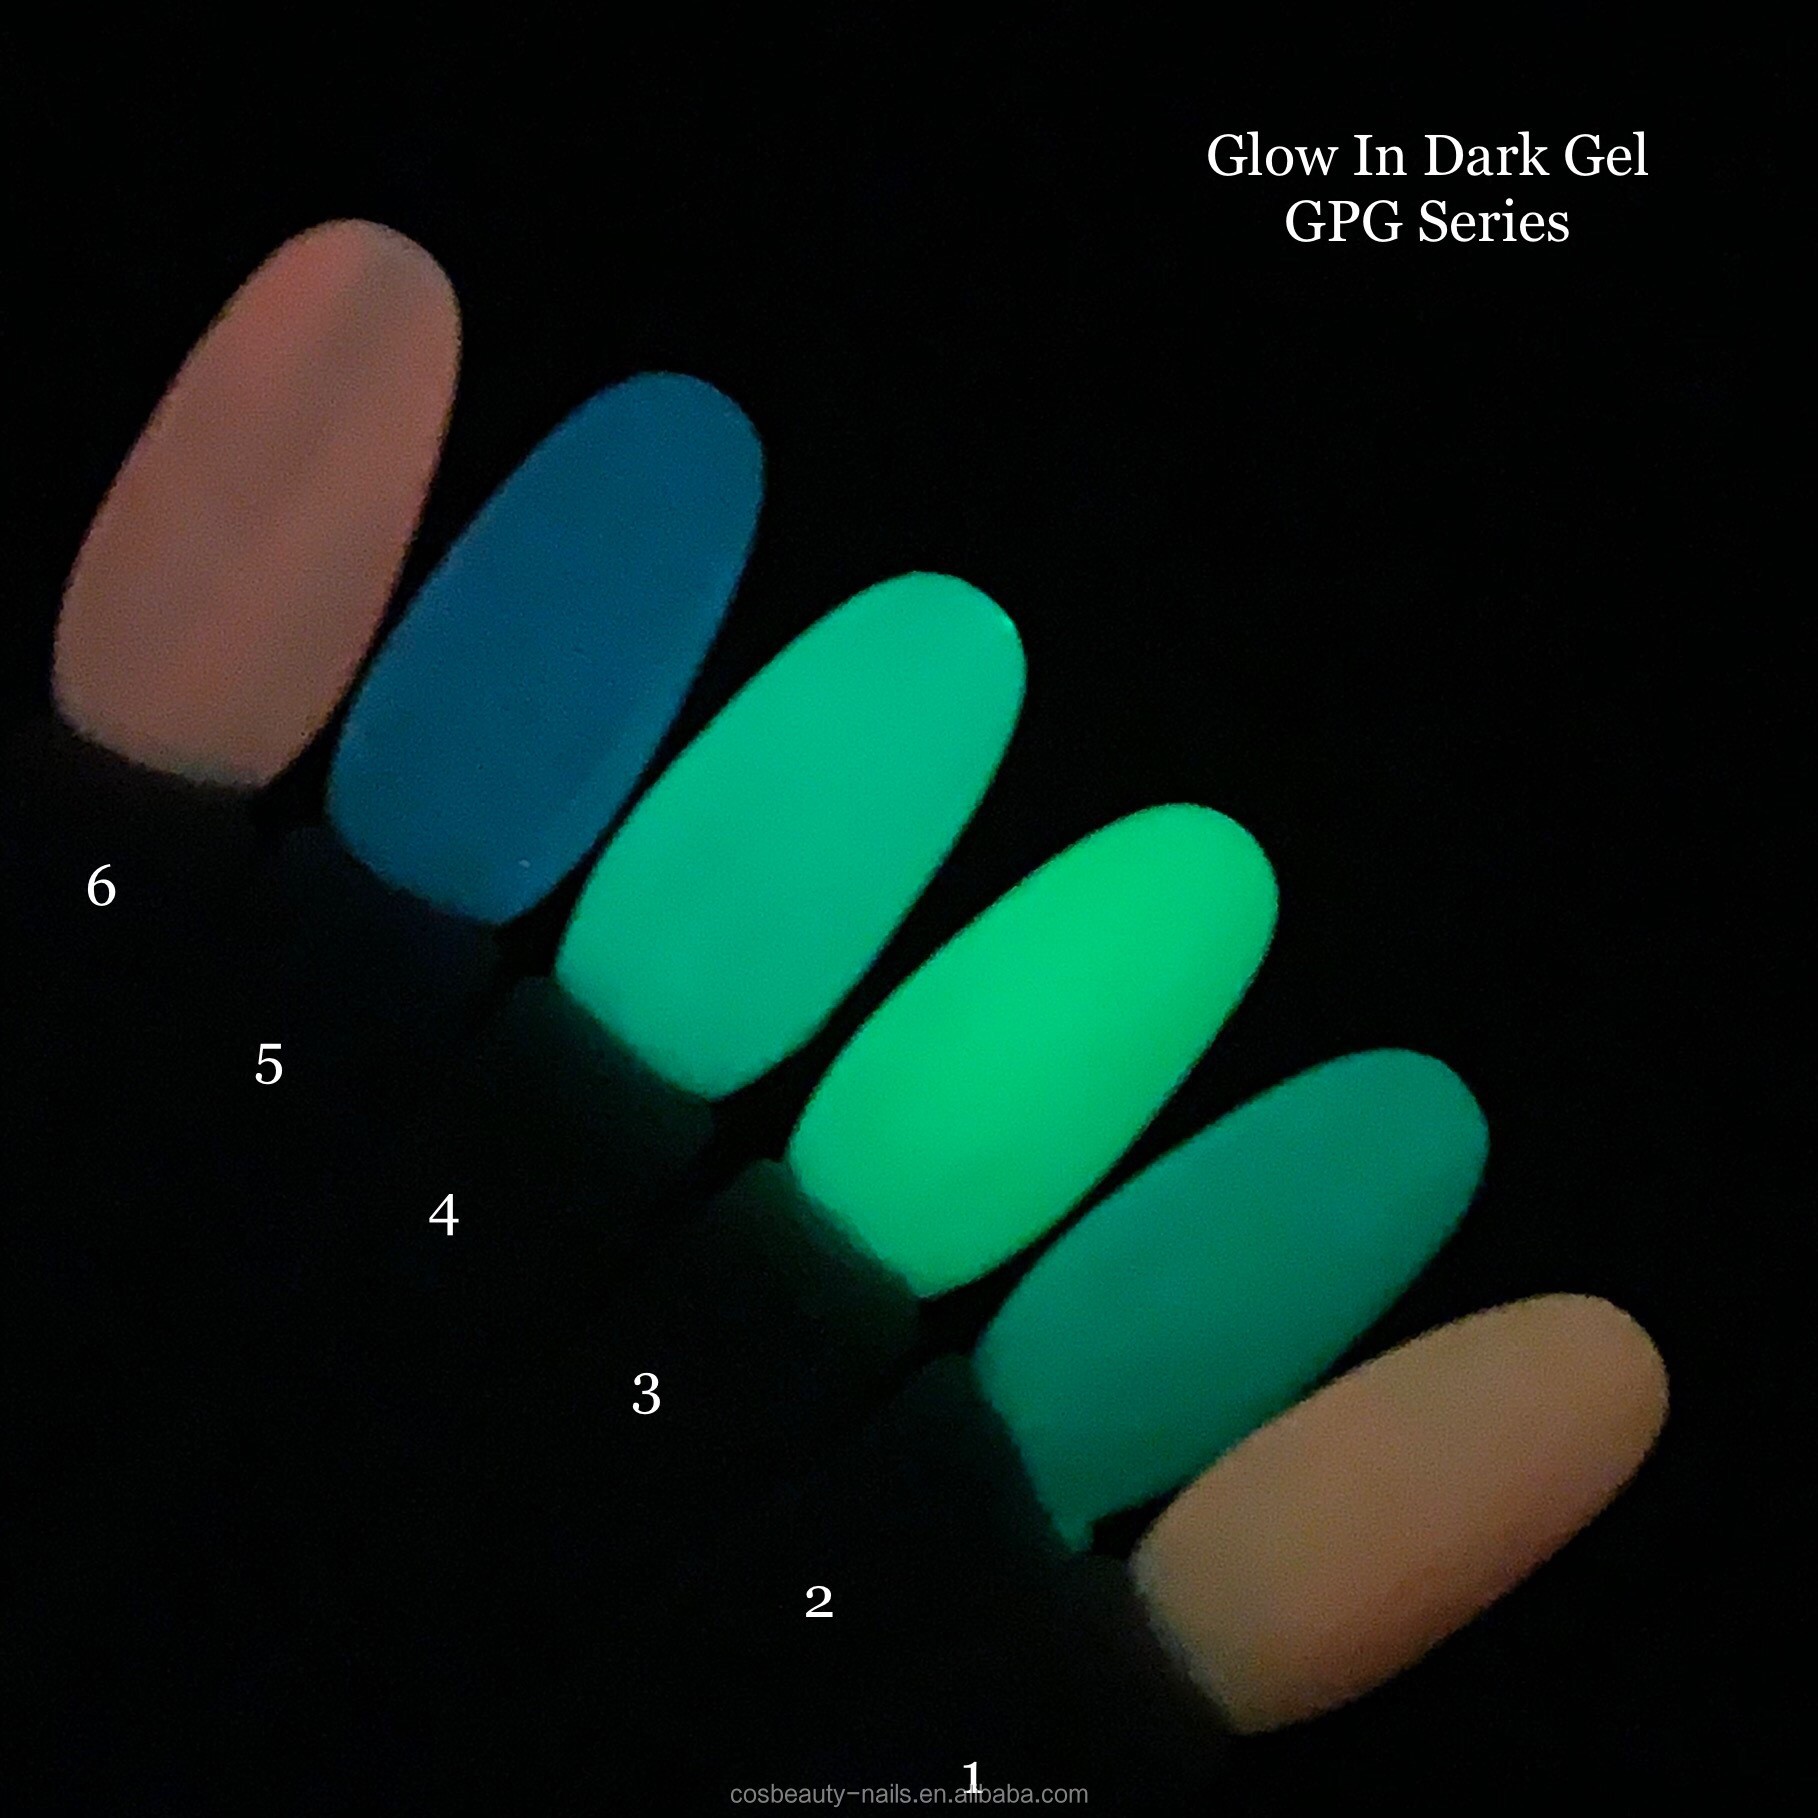 Wholesale Private Label Nail Product UV GEL Glow In Dark Nail Polish For Shiny Long Lasting